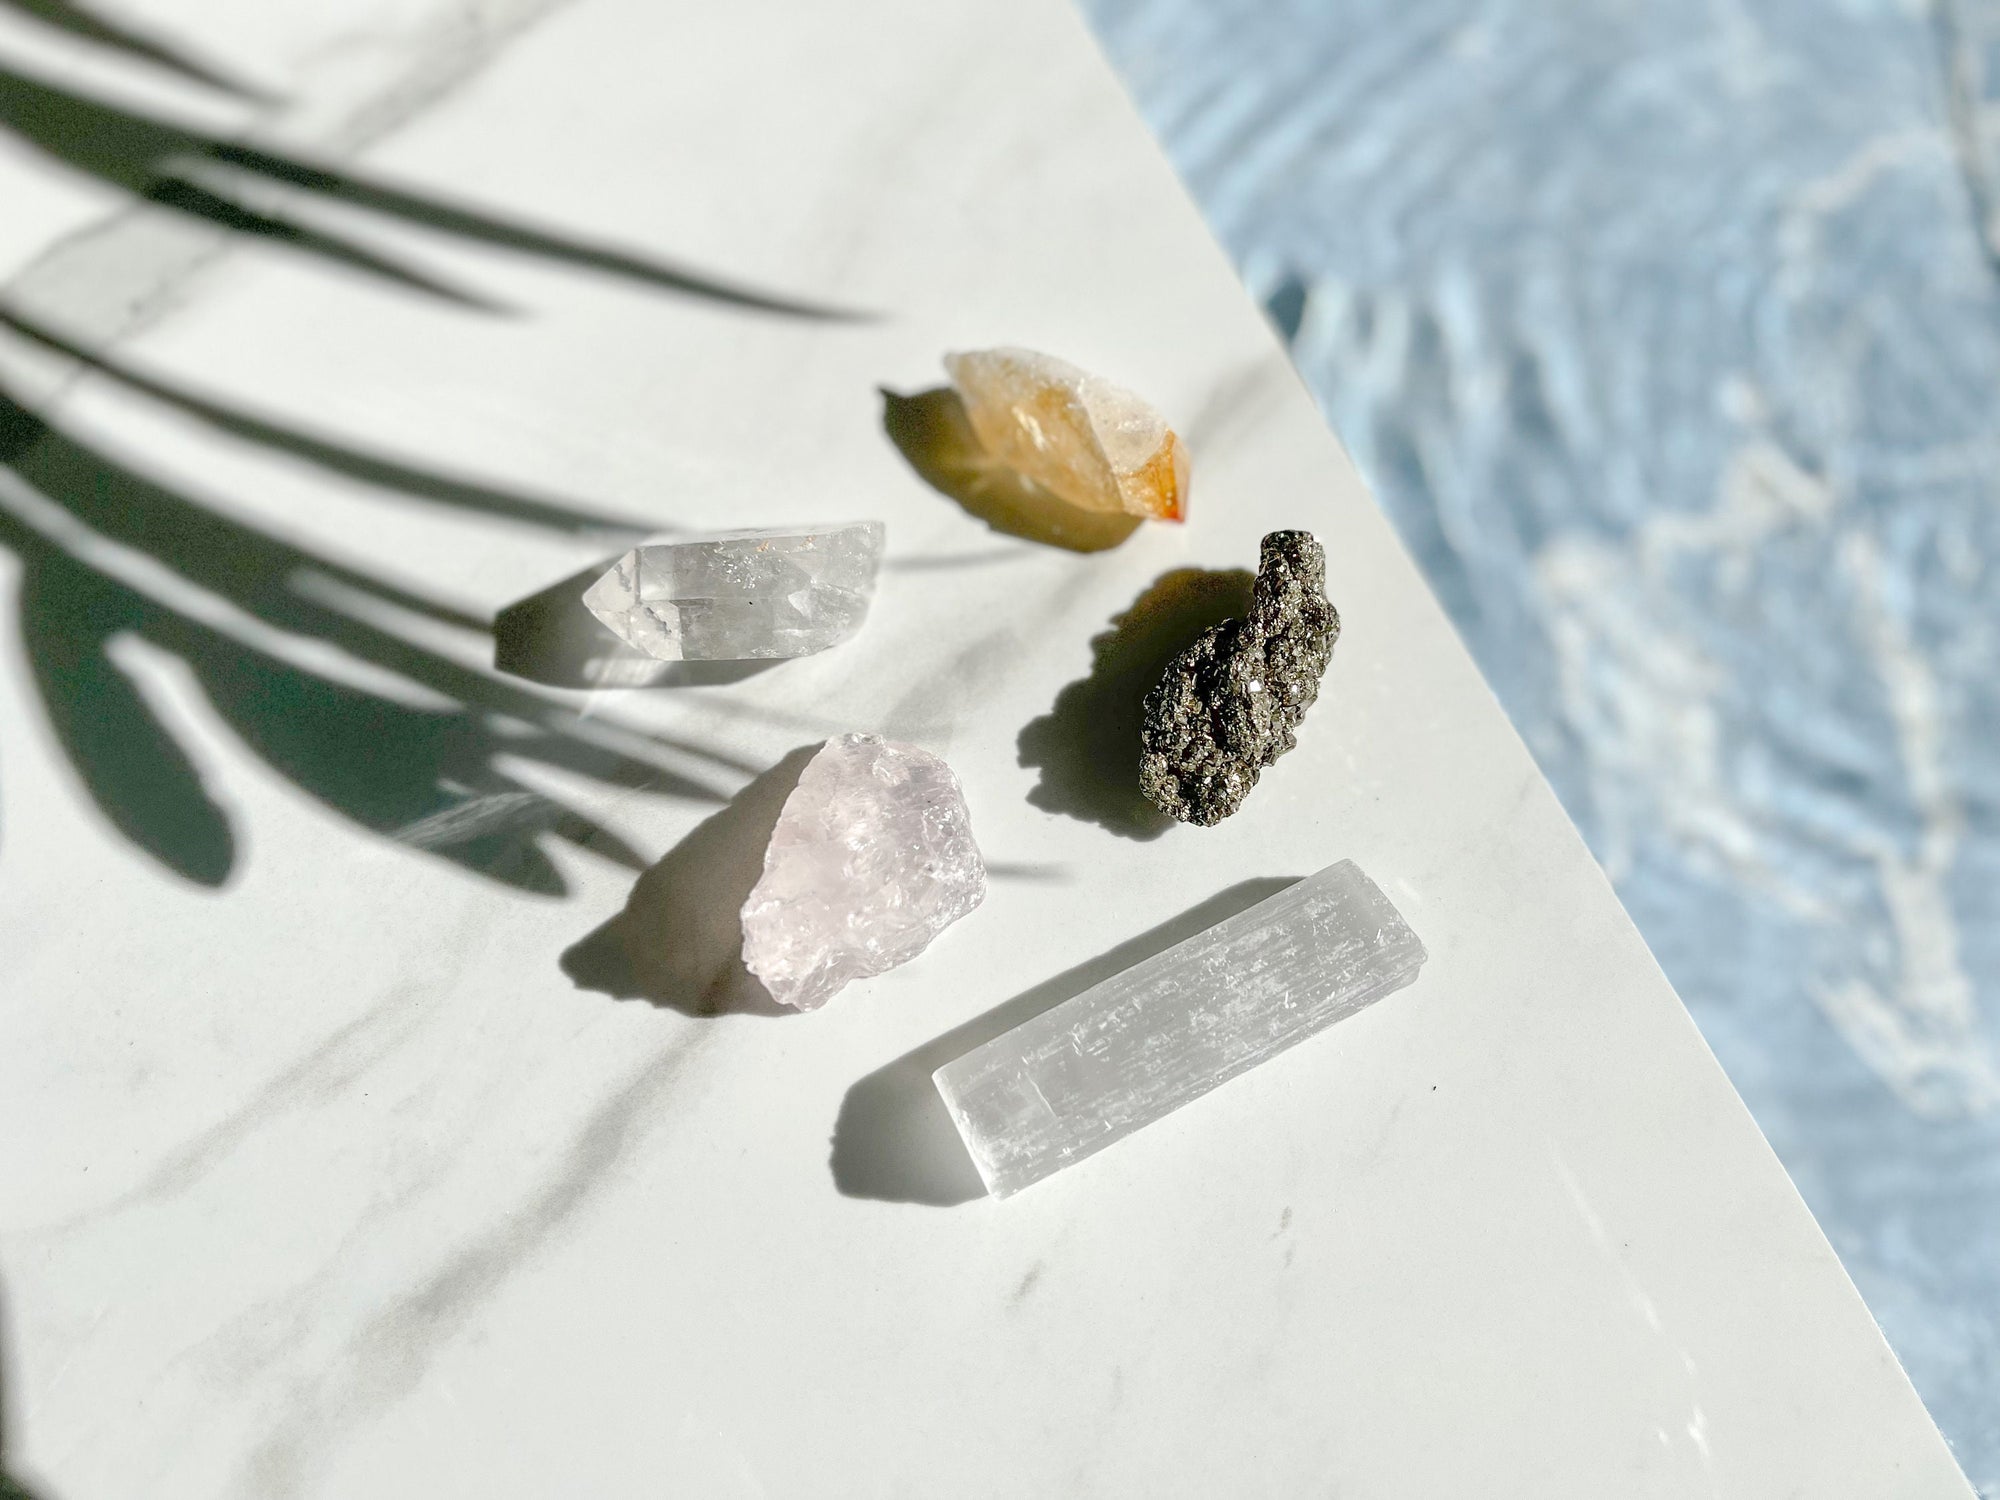 Nurture Your Friendships with this Energizing Crystal Set - Includes Pyrite, Clear Quartz, Citrine, Rose Quartz, and a Free Selenite Stick